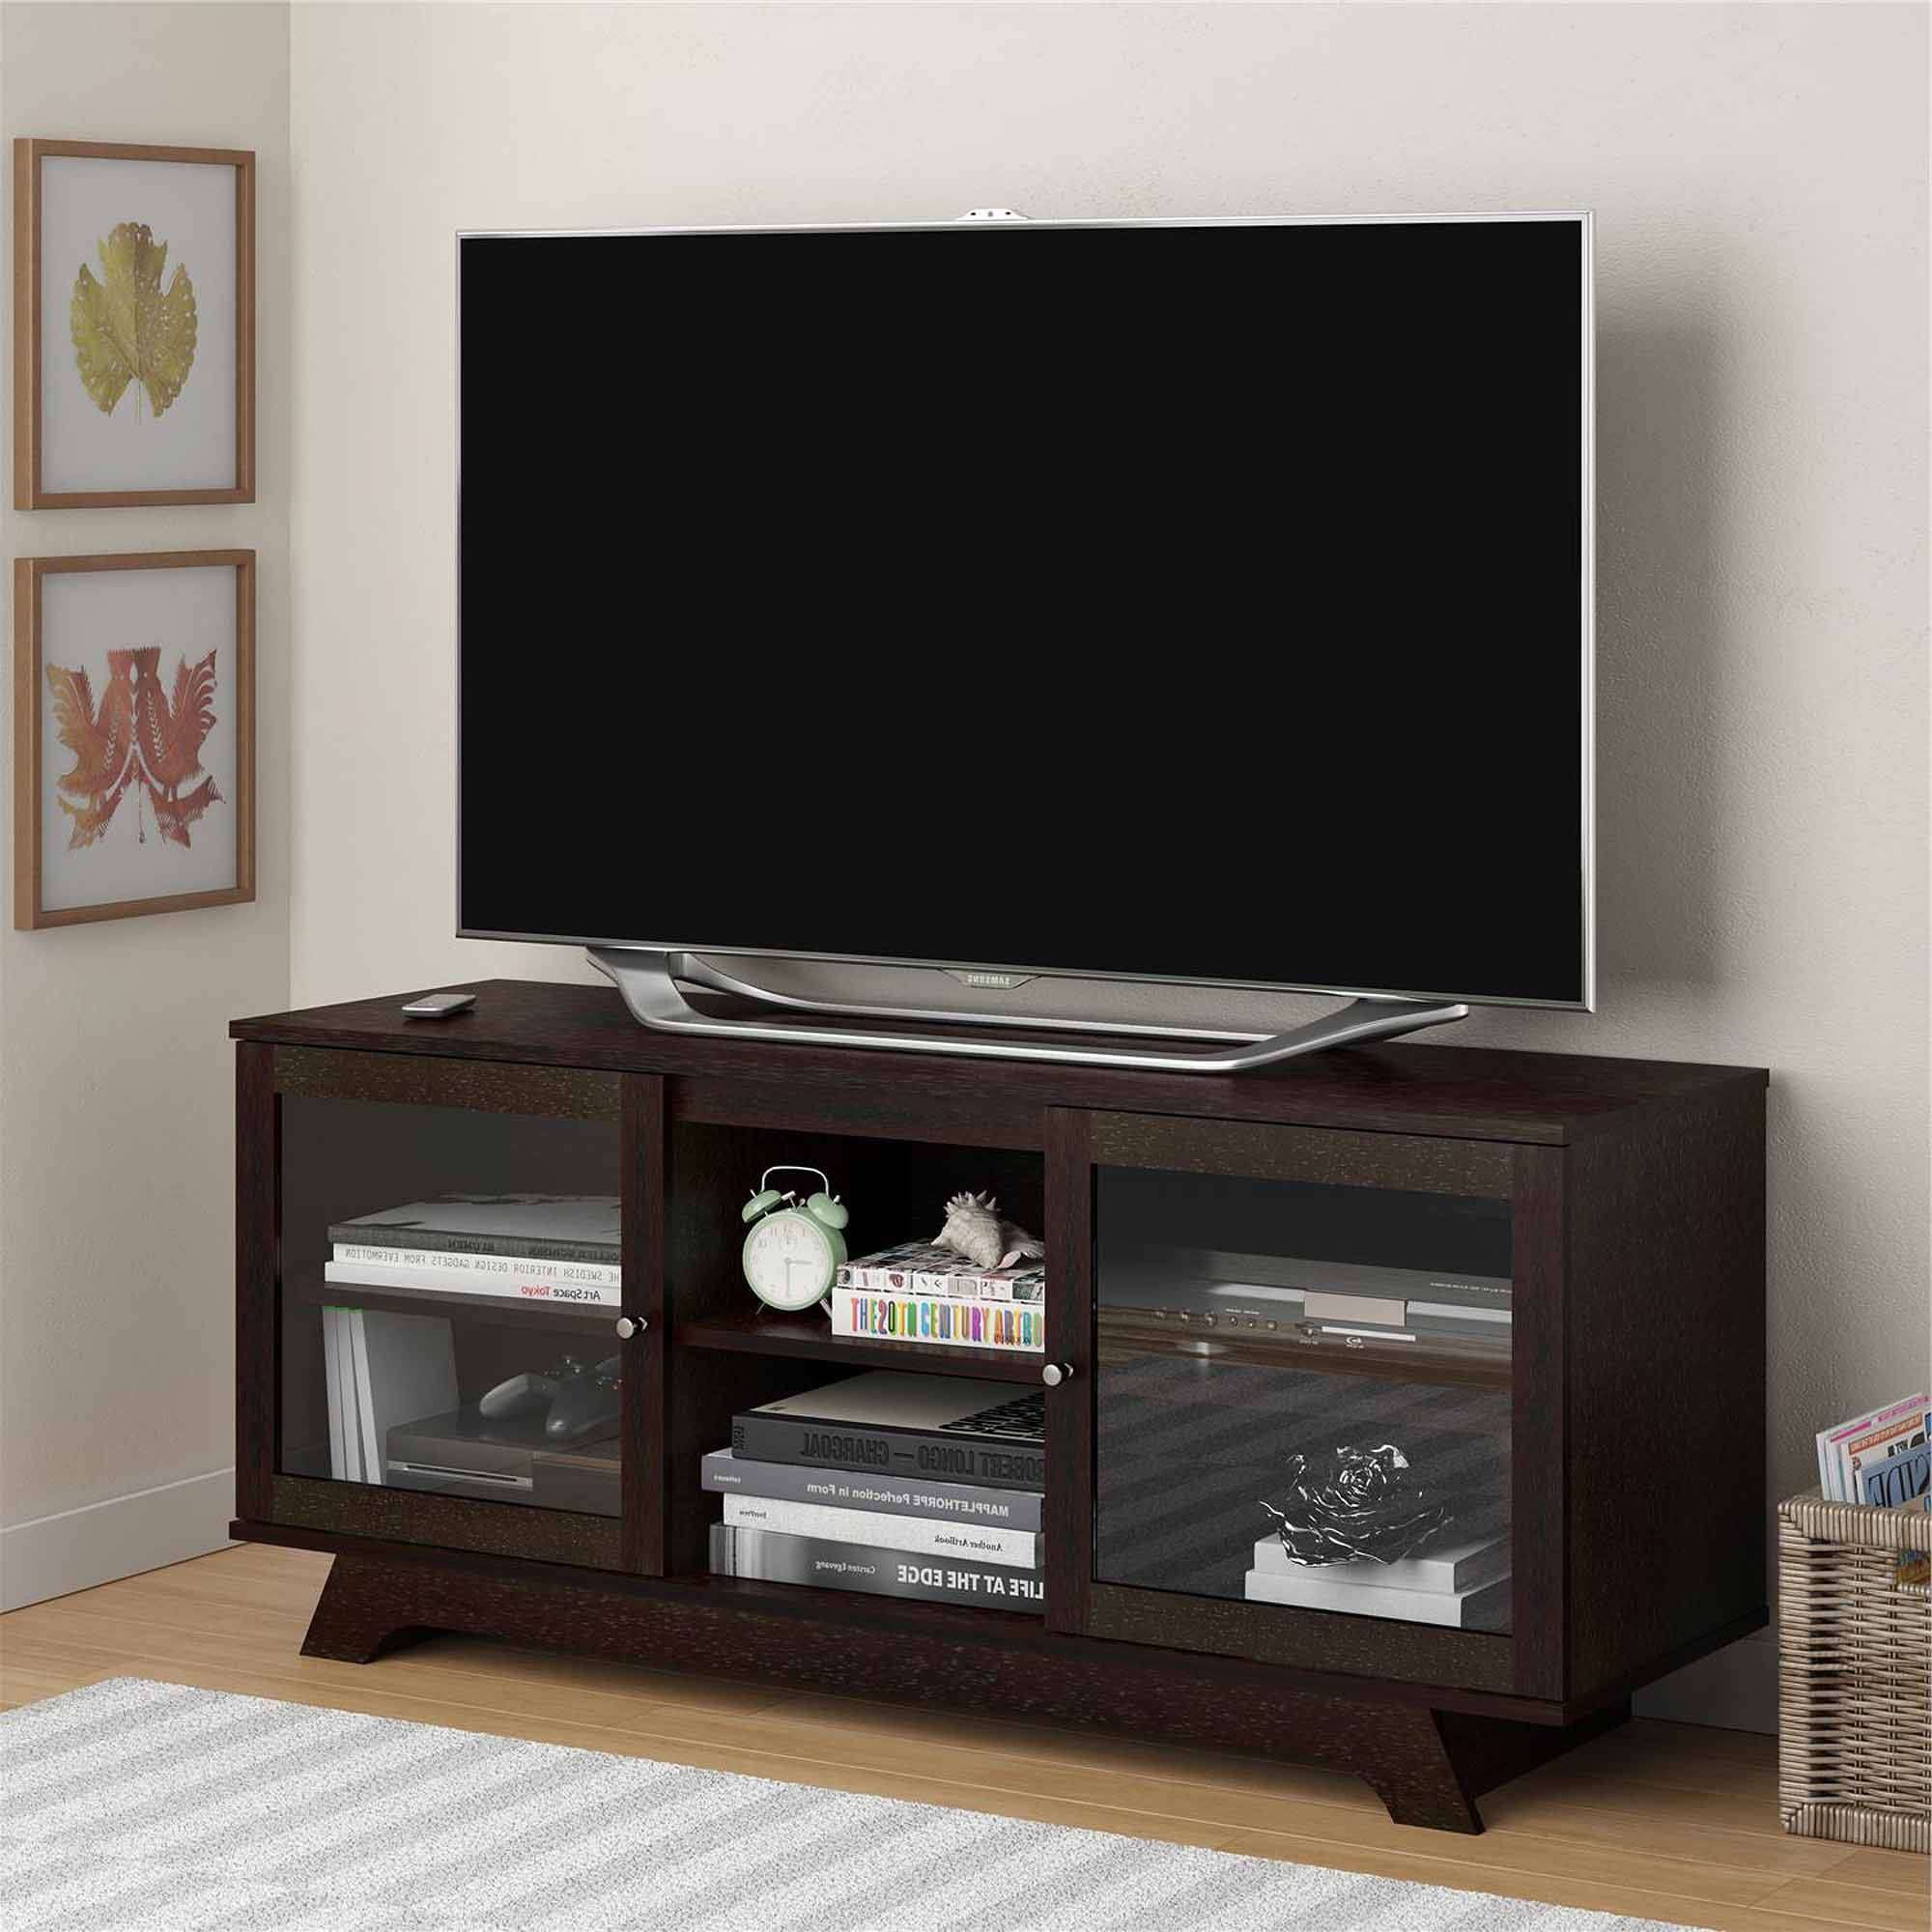 Tv Stand : Stirring Corner Tv Stand For Inch Photo Concept Flat Throughout Corner Tv Stands For 55 Inch Tv (View 12 of 15)